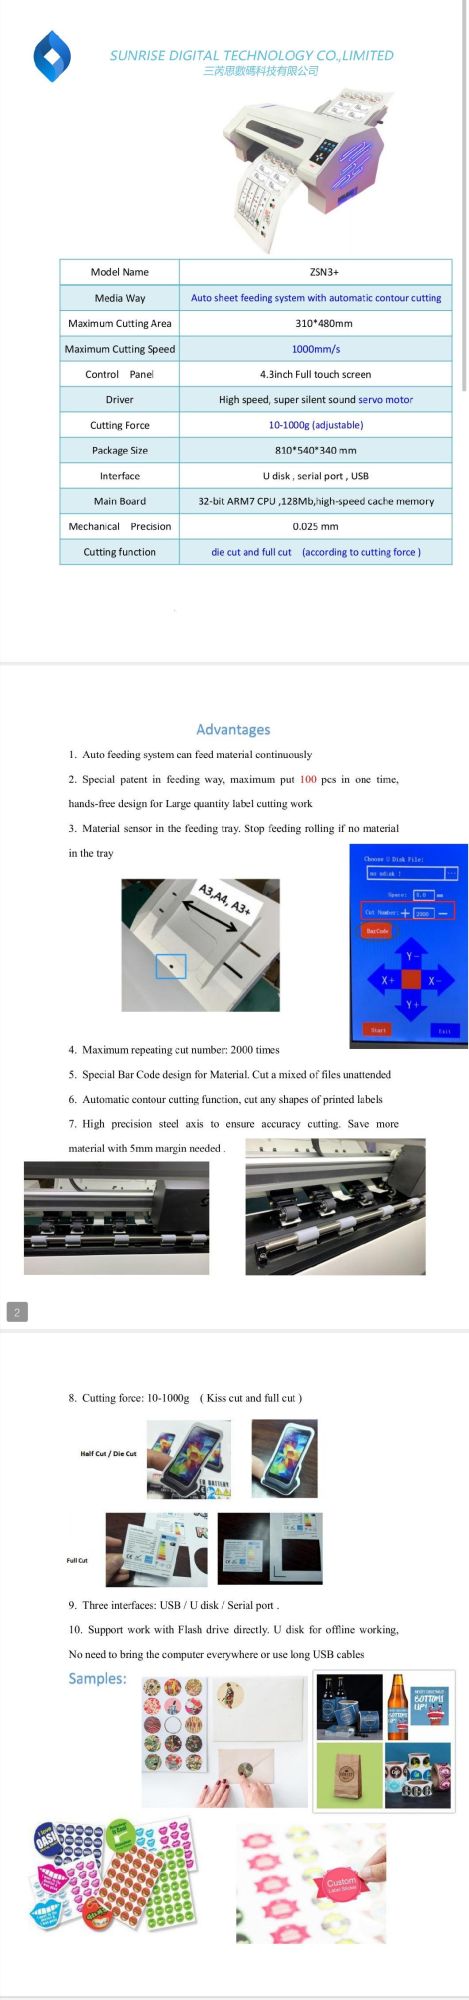 Die-Cutting Machine for Different Files with CCD Camera